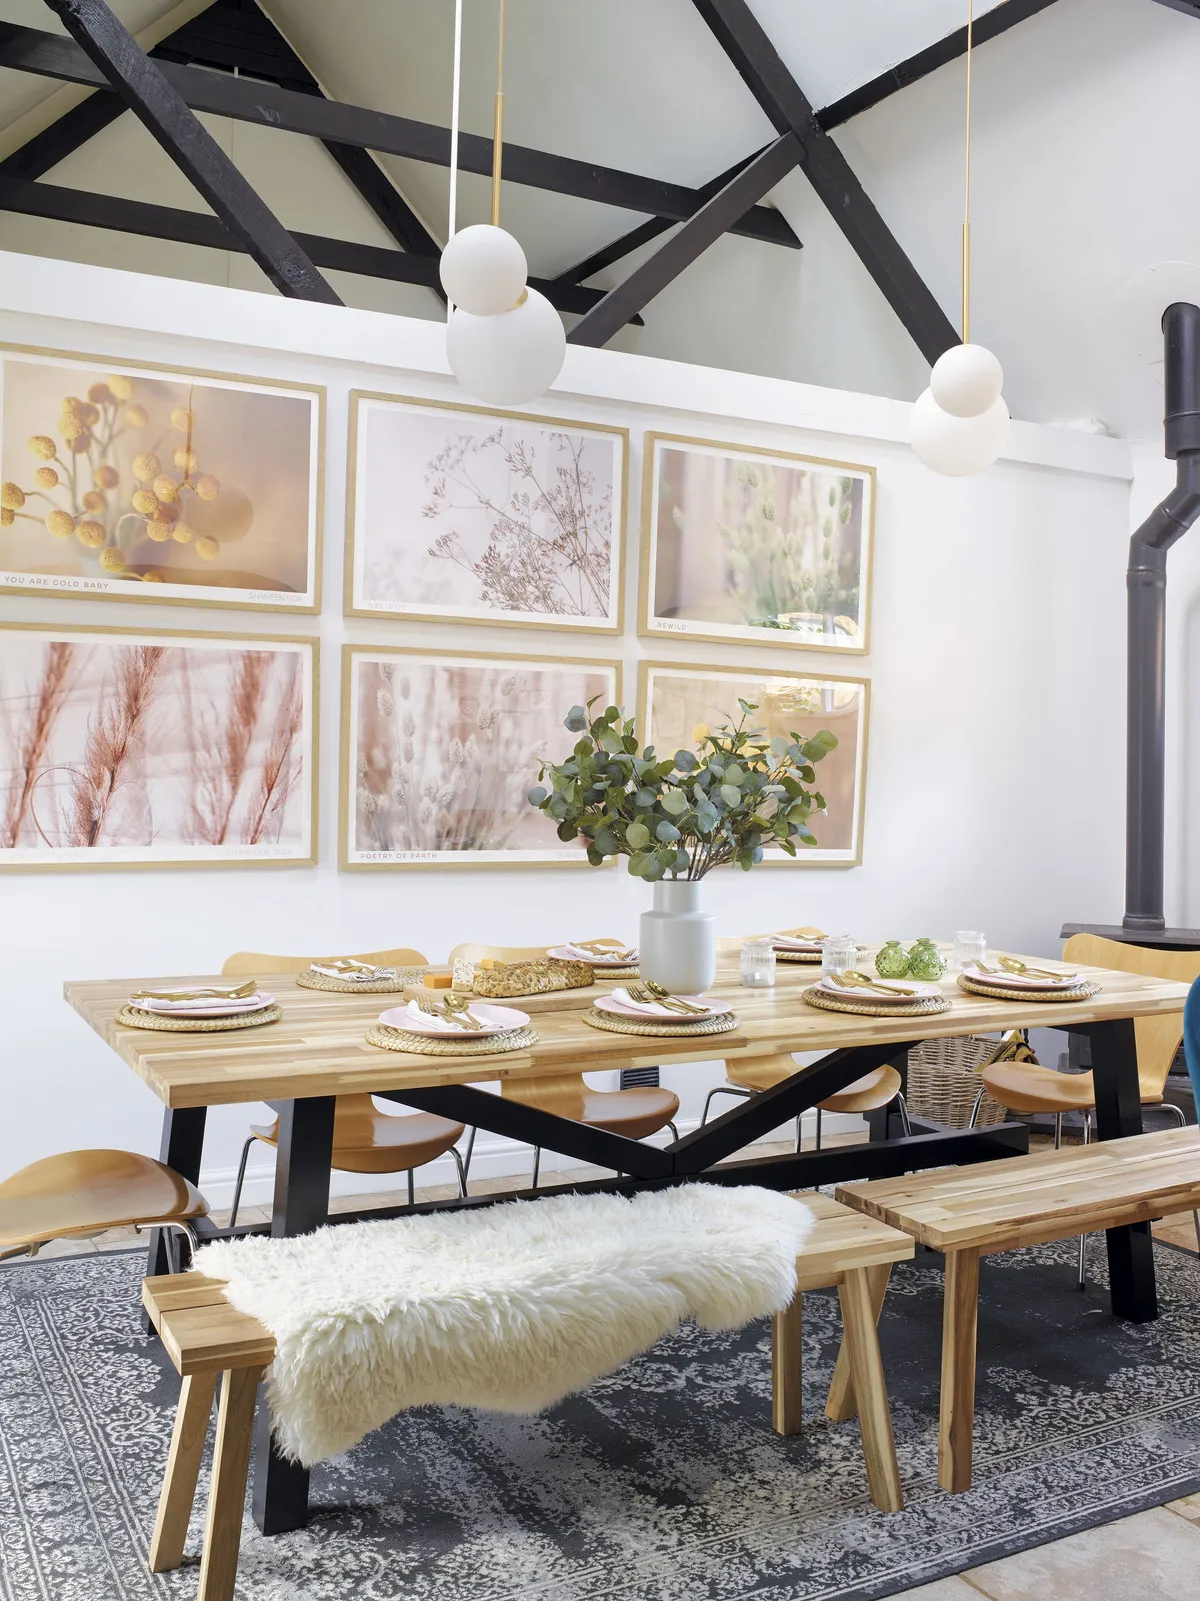 Overhead lighting from House Doctor at Amara provides a touch of glam at mealtimes, while the Viscose blue rug from Benuta and Shaneen Rosewarne Cox wall art adds a homely touch